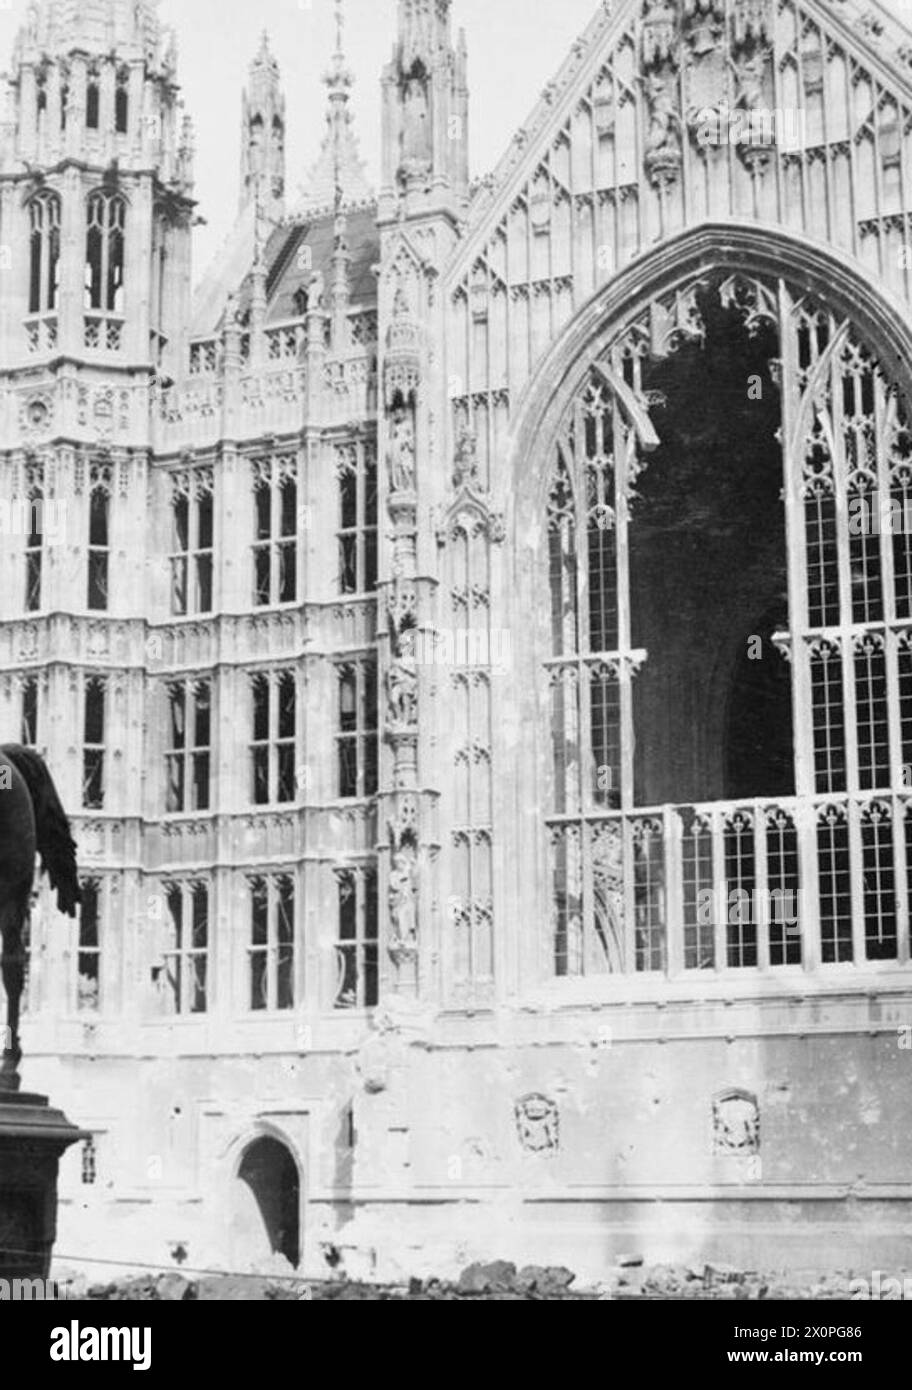 BOMB DAMAGE IN LONDON DURING THE SECOND WORLD WAR - One wing of the House of Commons, which was slightly damaged when a bomb fell in the forecourt. The statue of Richard the Lionheart is in the foreground Stock Photo